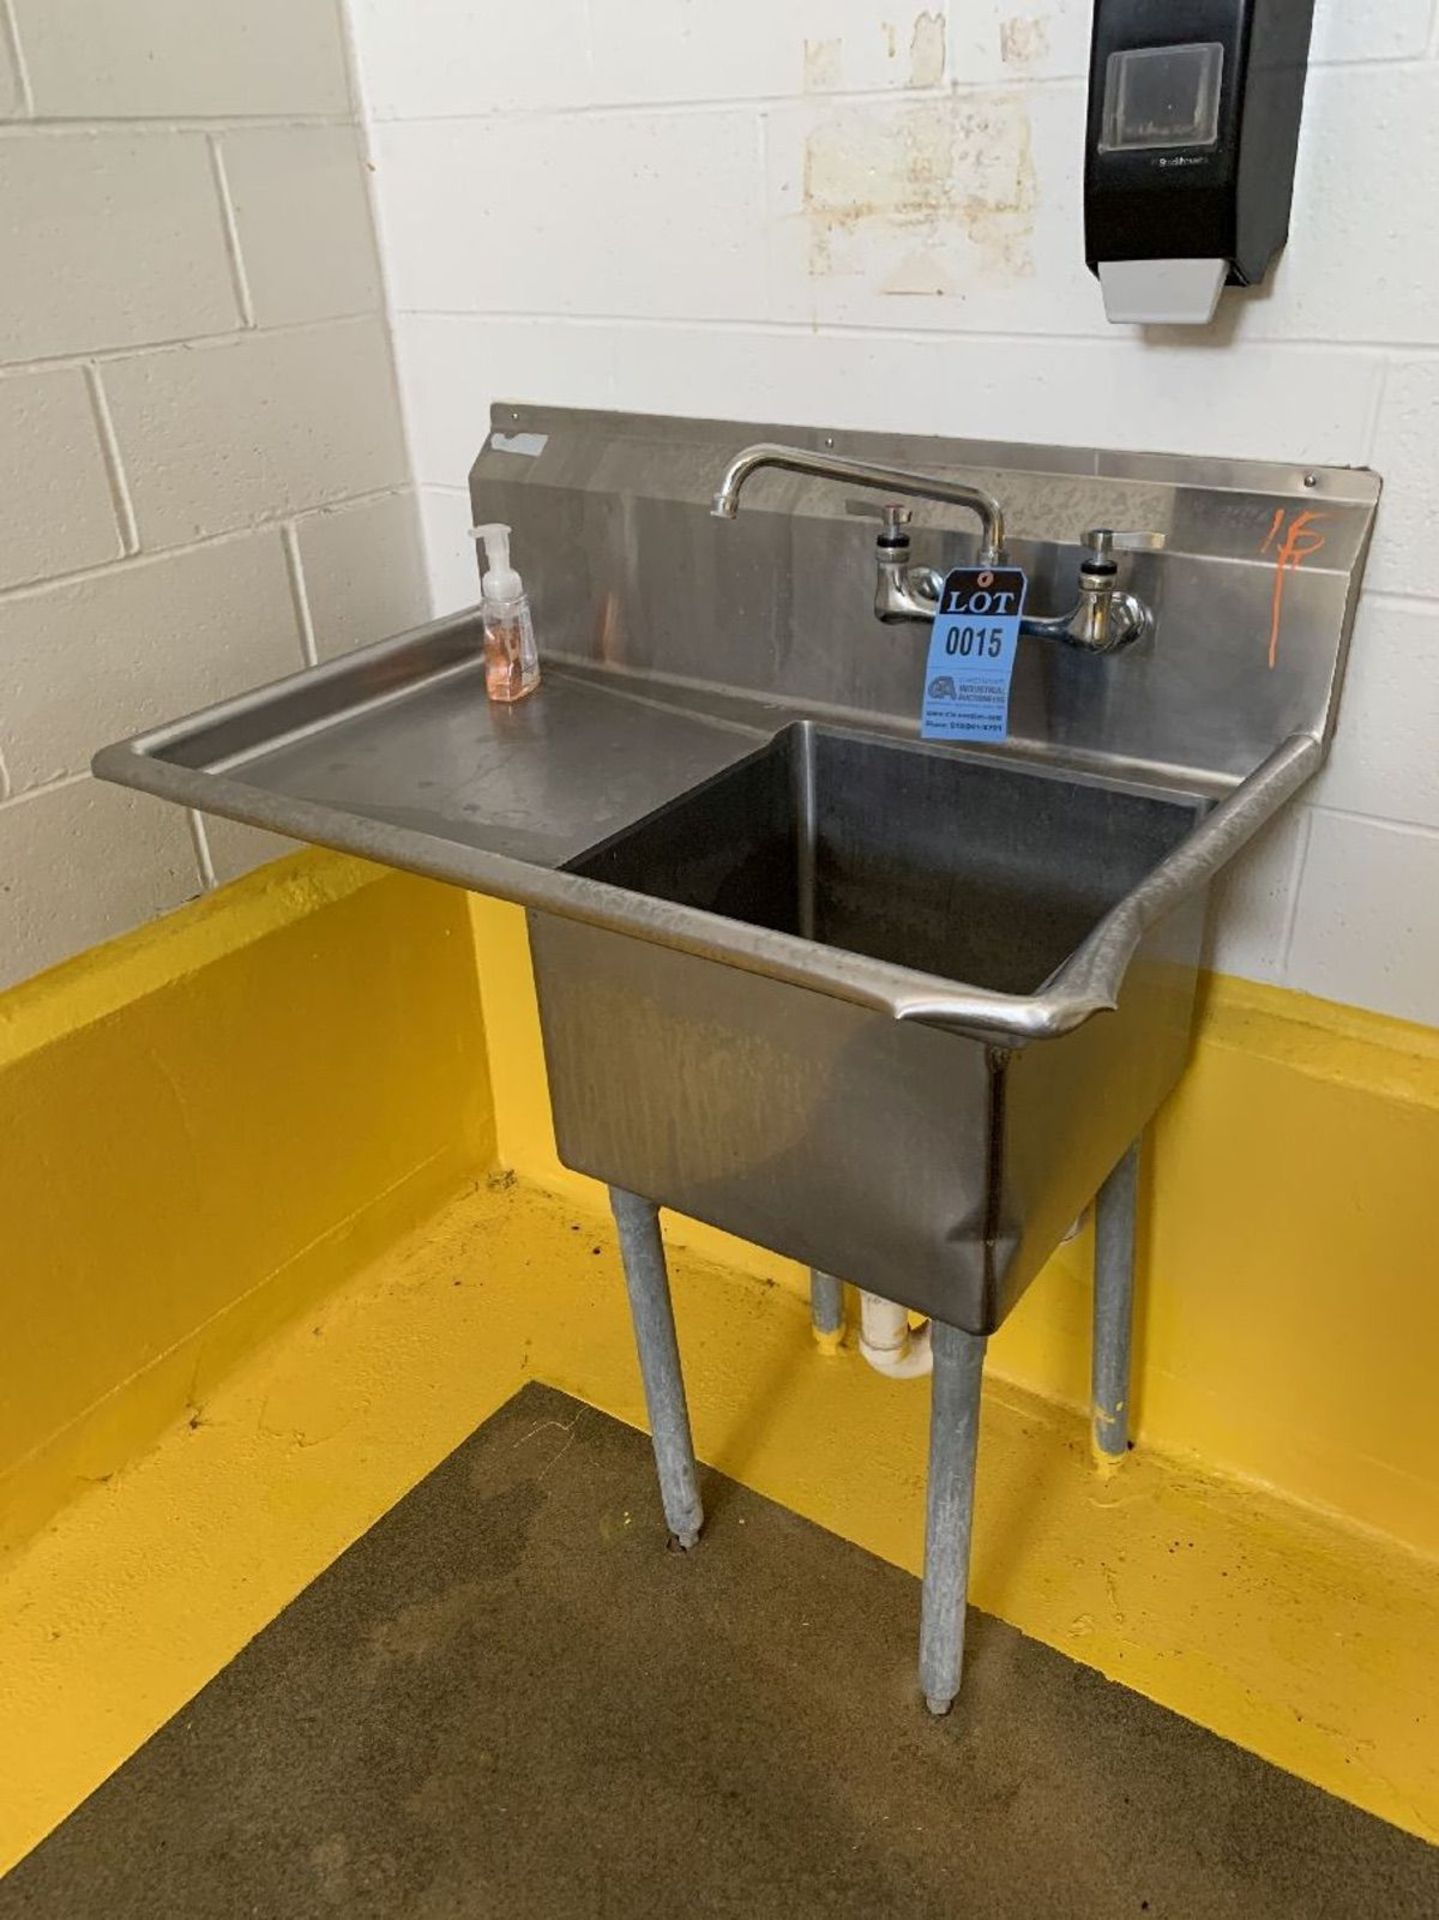 SINK 24" X 40" X 36" HIGH STAINLESS STEEL SINGLE BOWL SINK | Rig Fee: $75